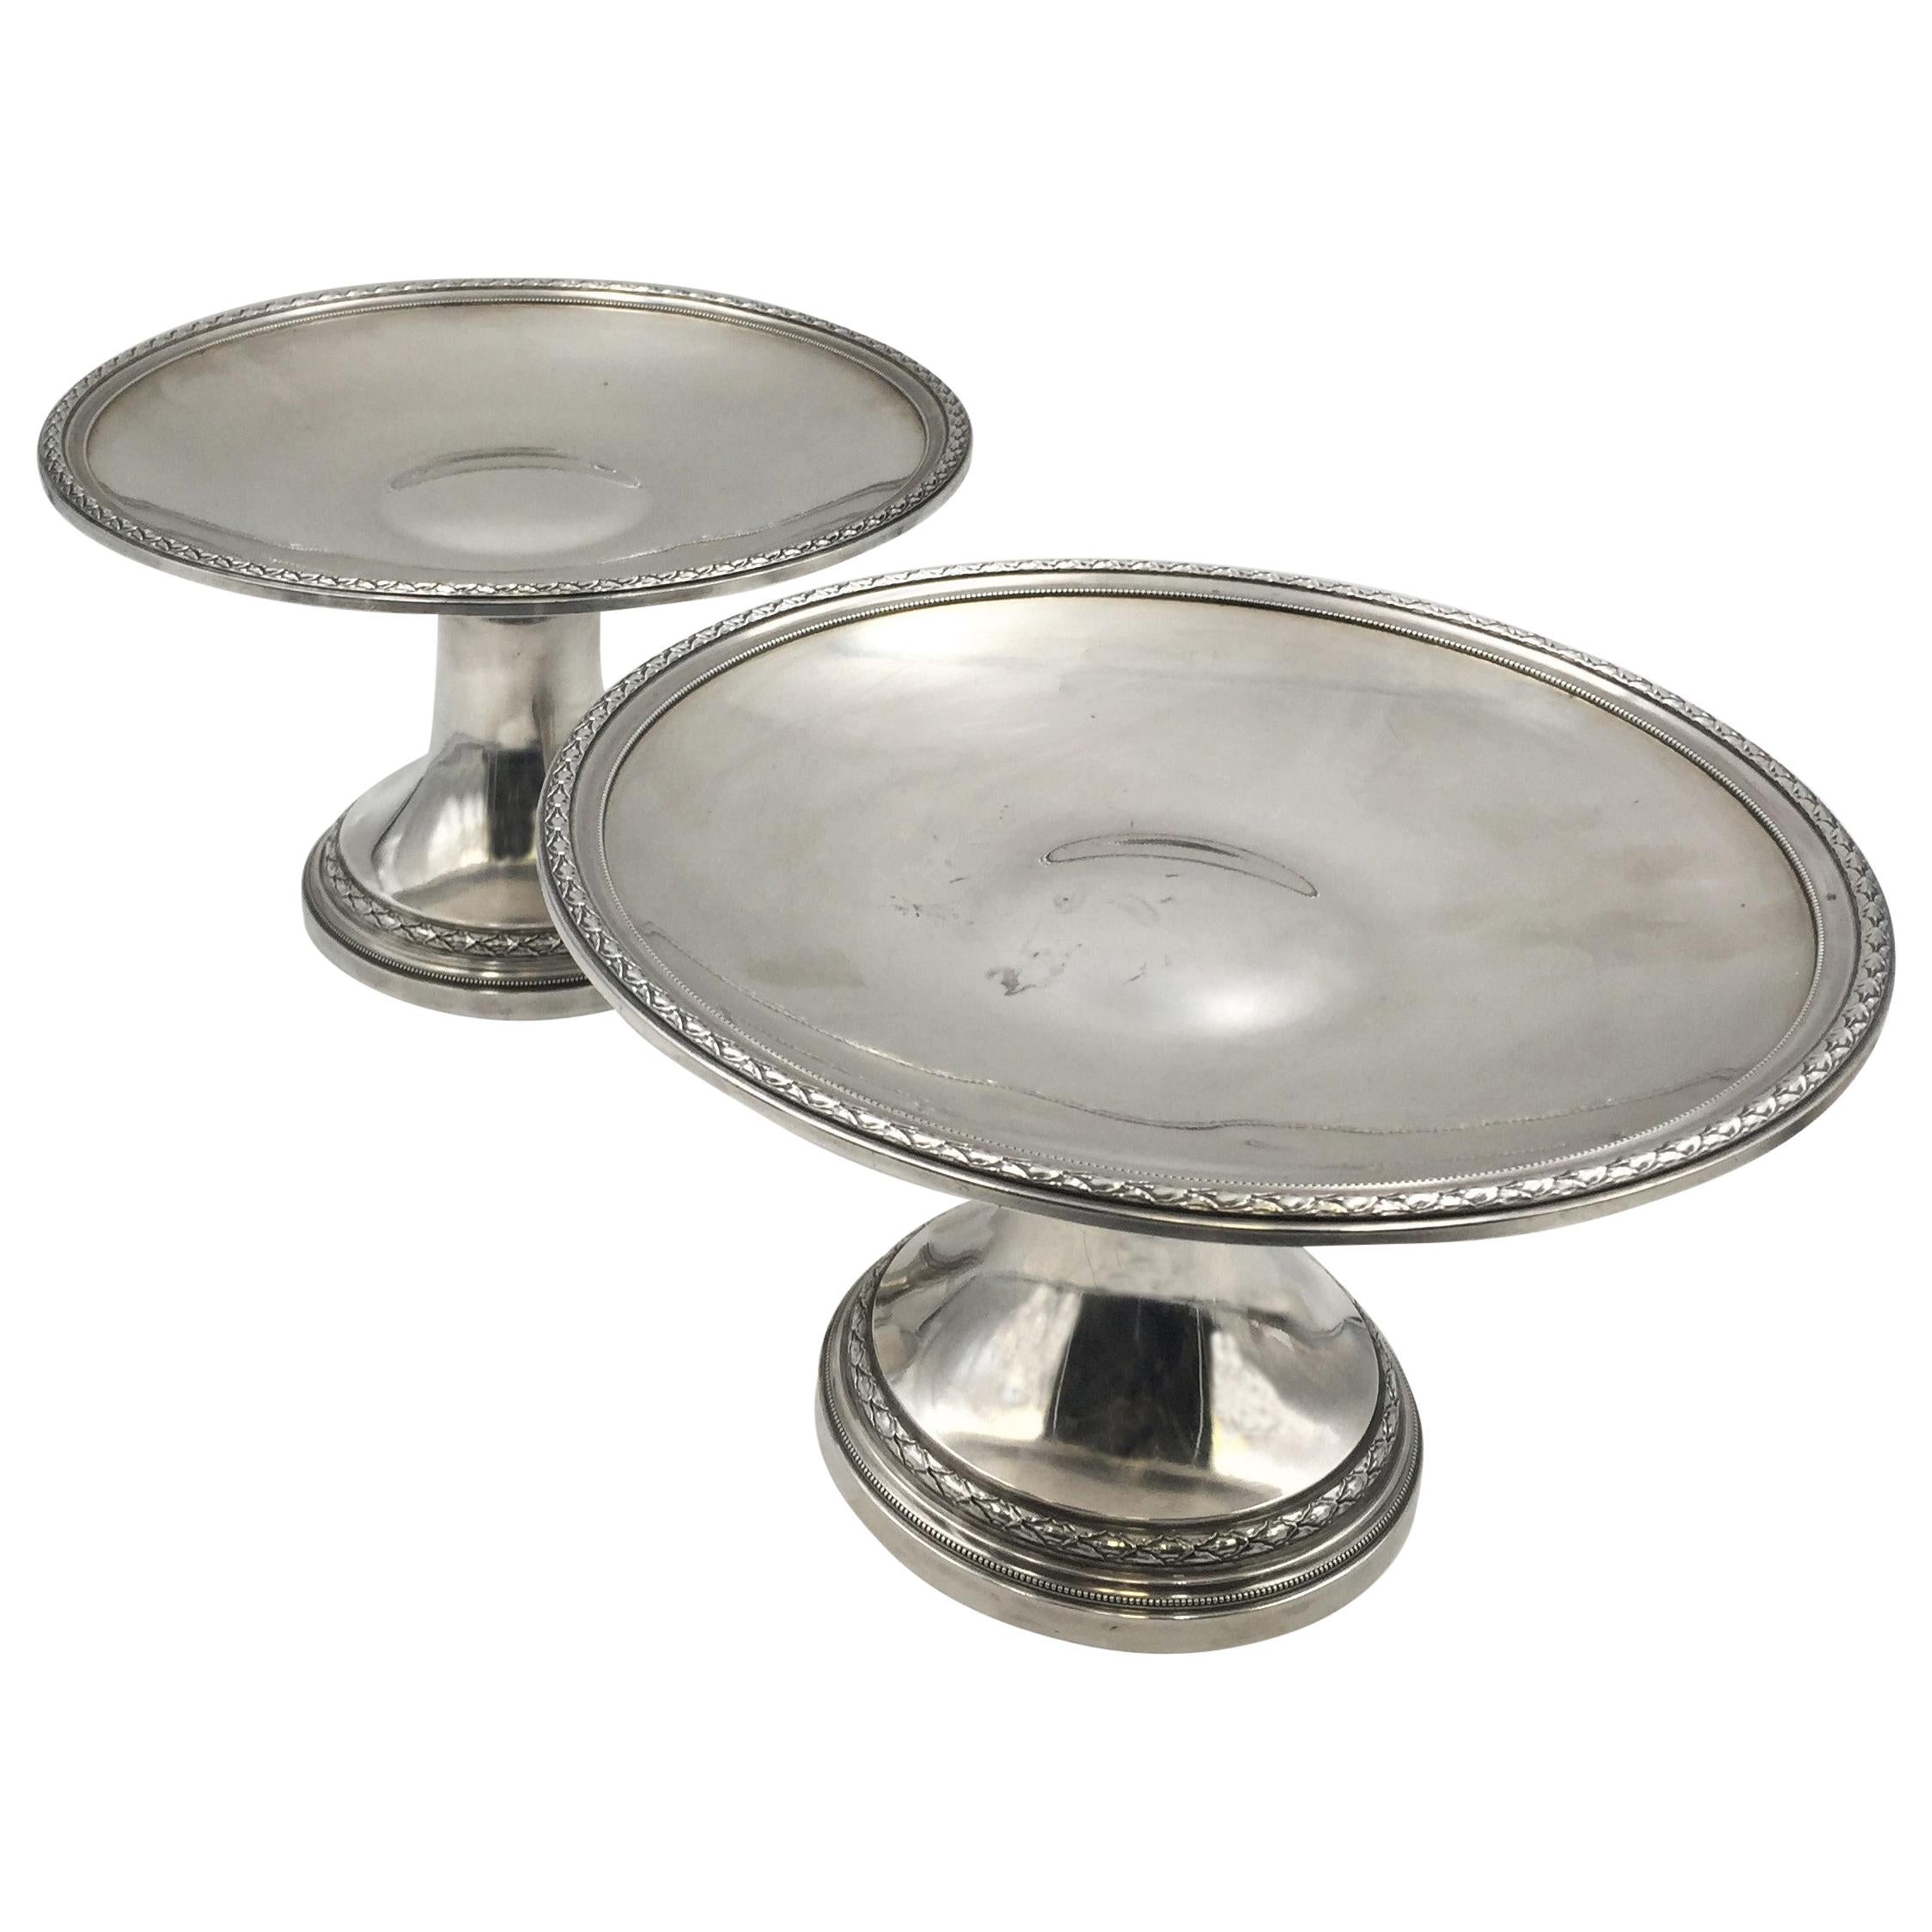 Pair of Emile Puiforcat, 19th century, French, 0.950 (higher purity than sterling) silver centerpiece stand with exquisite decorations near the rims and on the base. They measure 6'' in height by 9 1/2'' in diameter, weighs 38.4 troy ounces, and